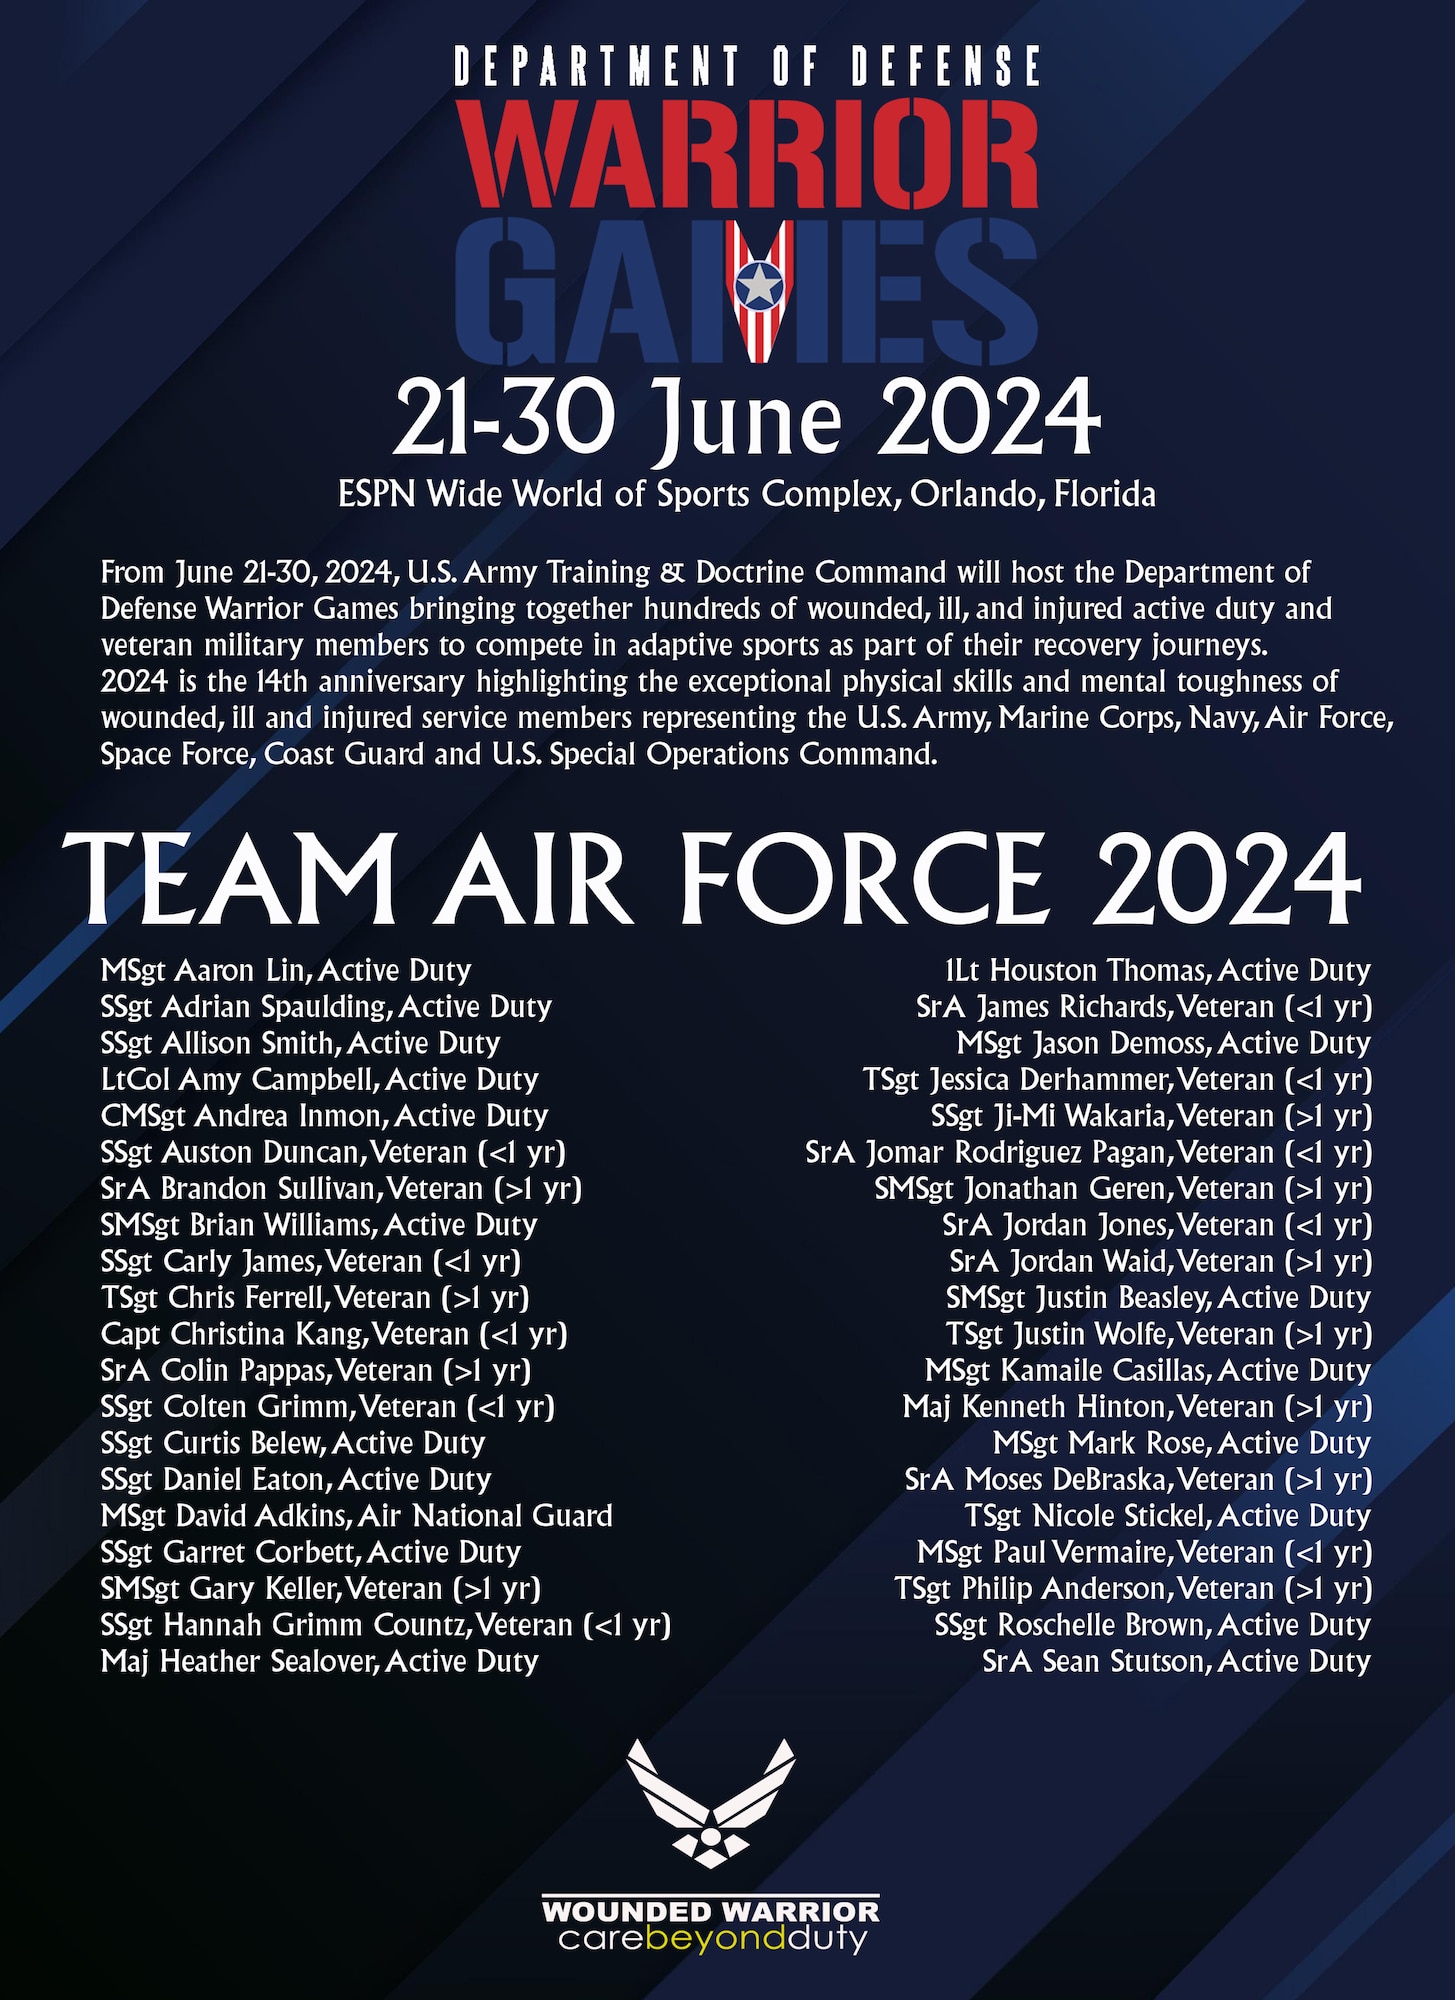 It is with great pleasure we announce Team Air Force who will compete at the 2024 Department of Defense Warrior Games in June at the ESPN Wide World of Sports complex in Orlando, Florida. (U.S. Air Force Graphic by Shawn Sprayberry)